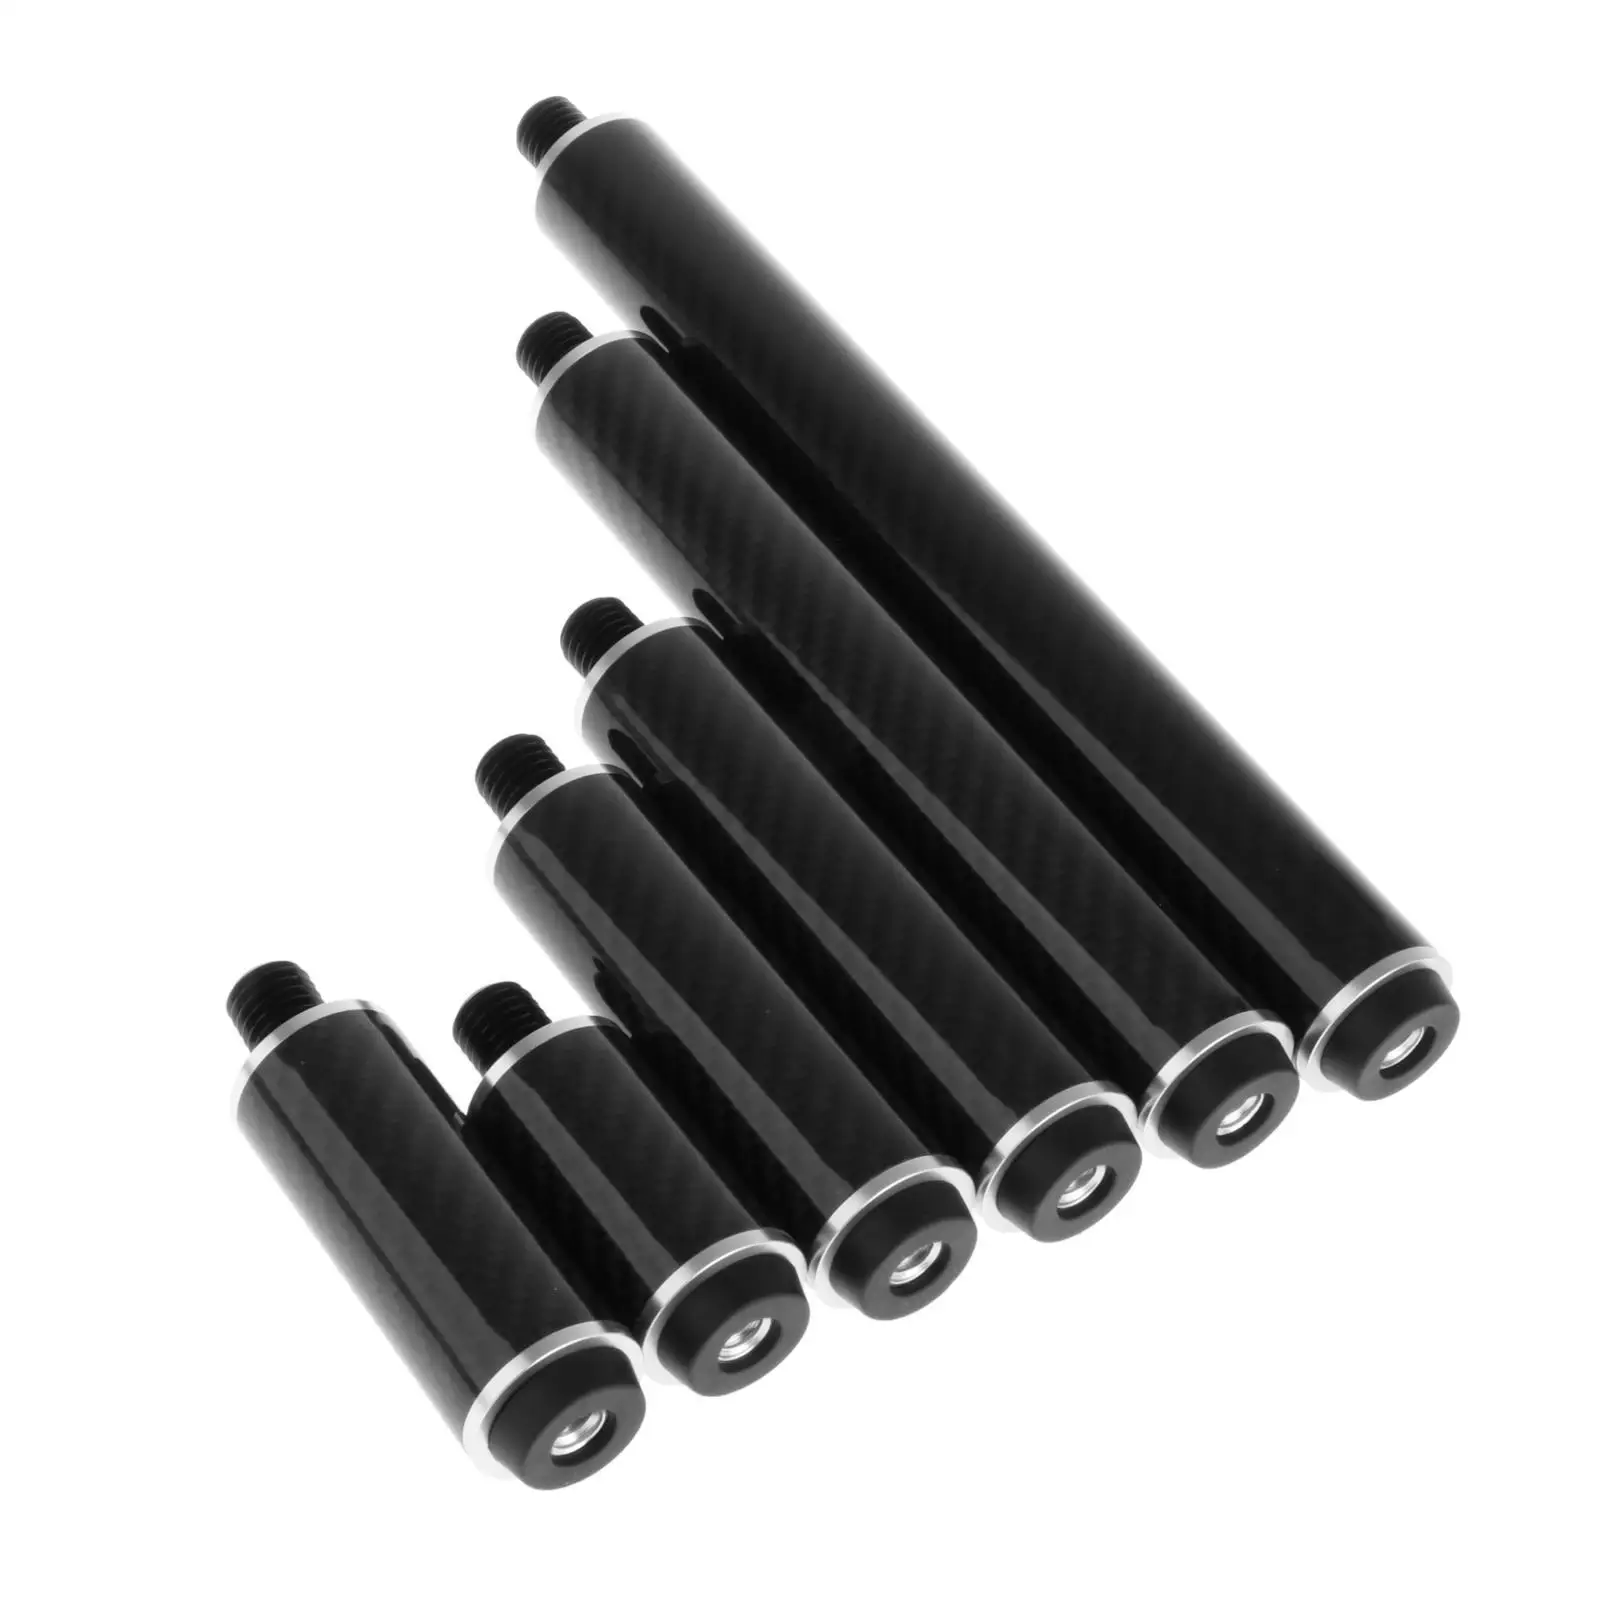 Billiards Pool Cue Extension with Back Cap Athlete Cue End Extender Adapter